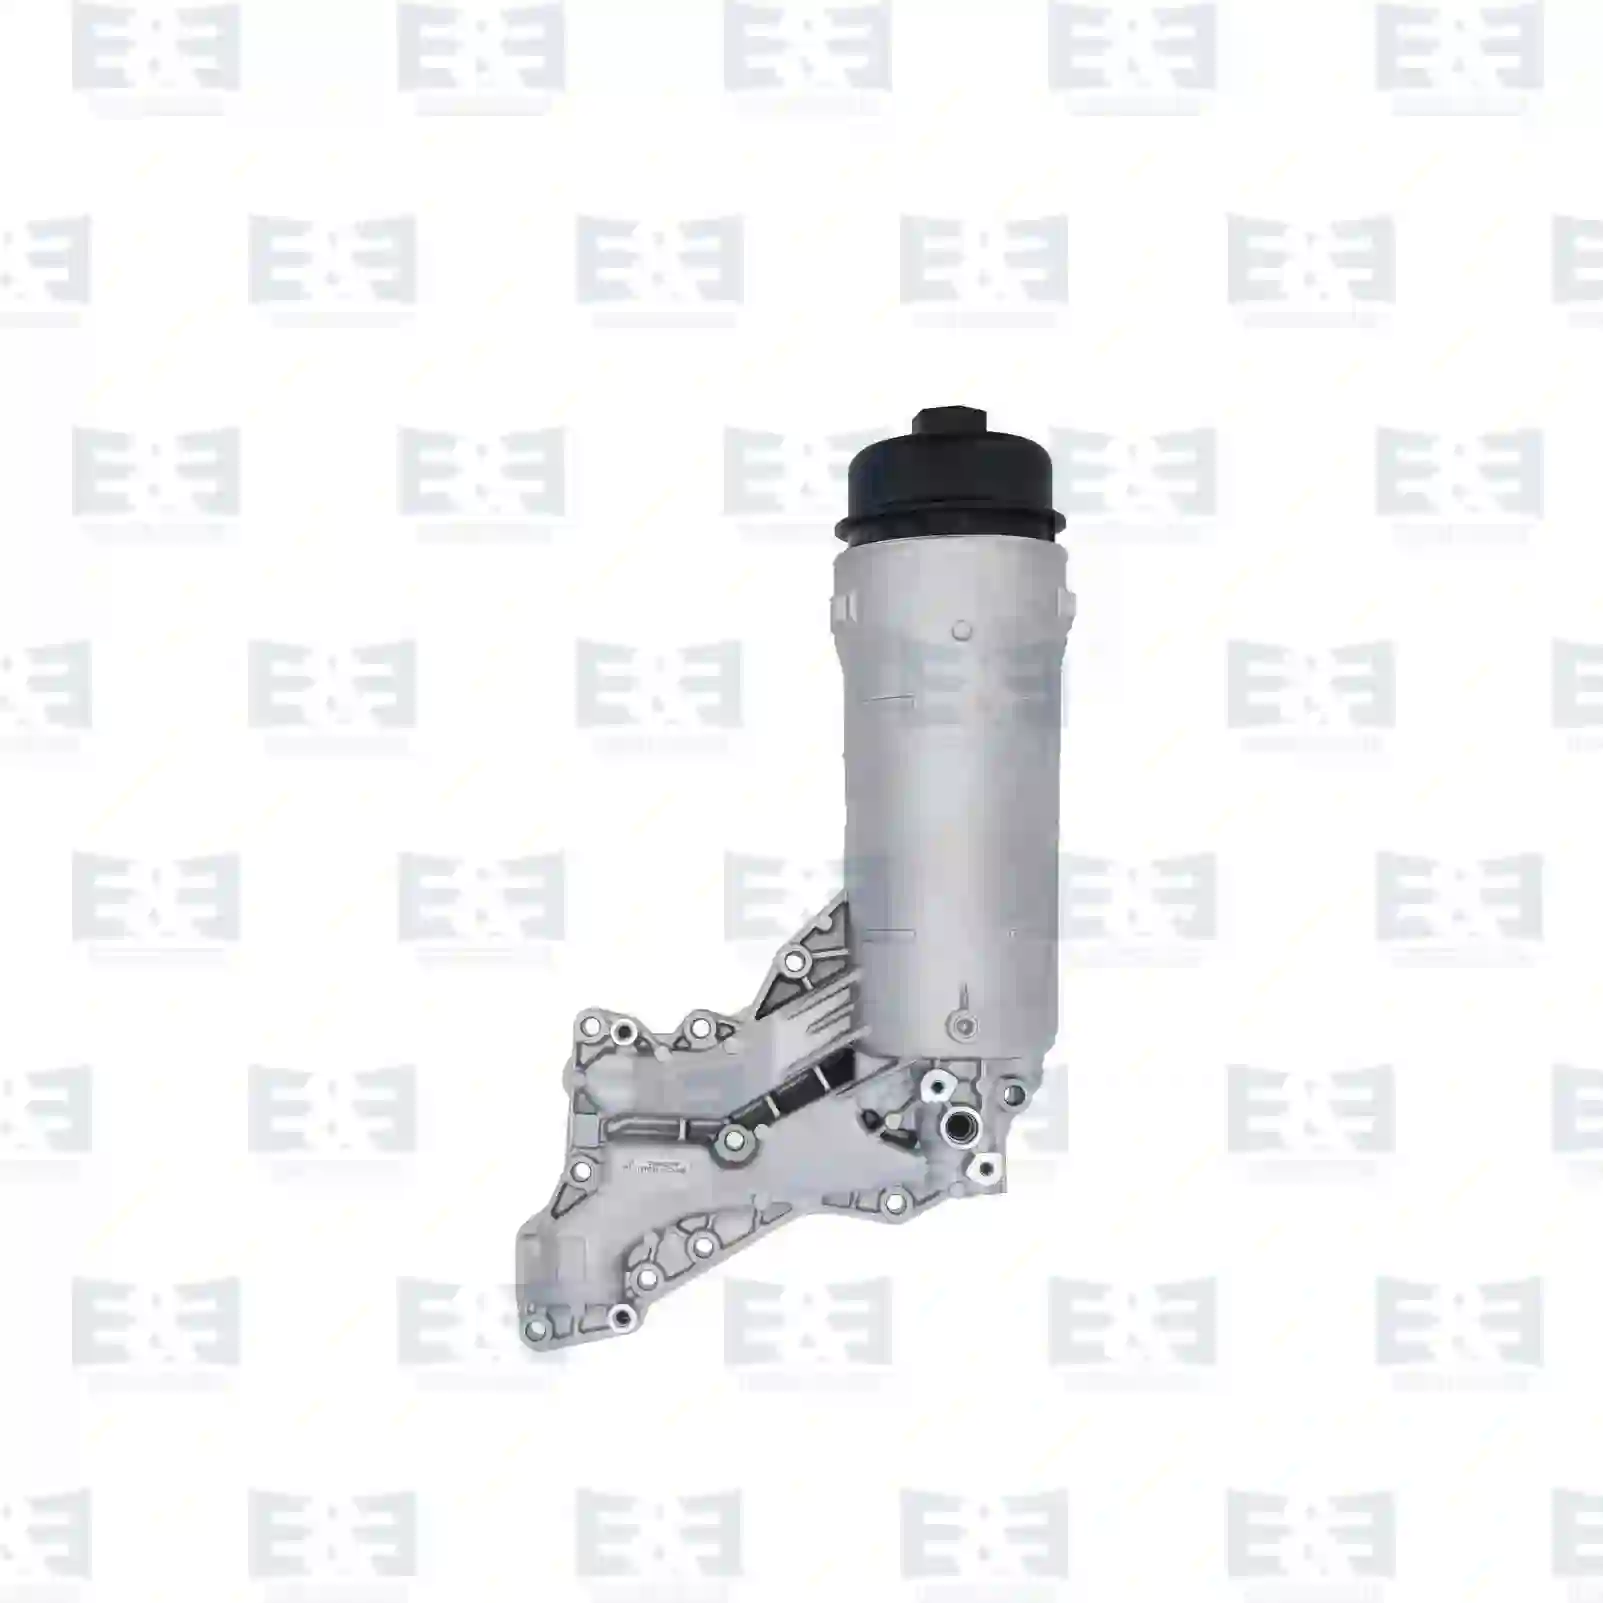  Oil filter housing, complete with filter || E&E Truck Spare Parts | Truck Spare Parts, Auotomotive Spare Parts